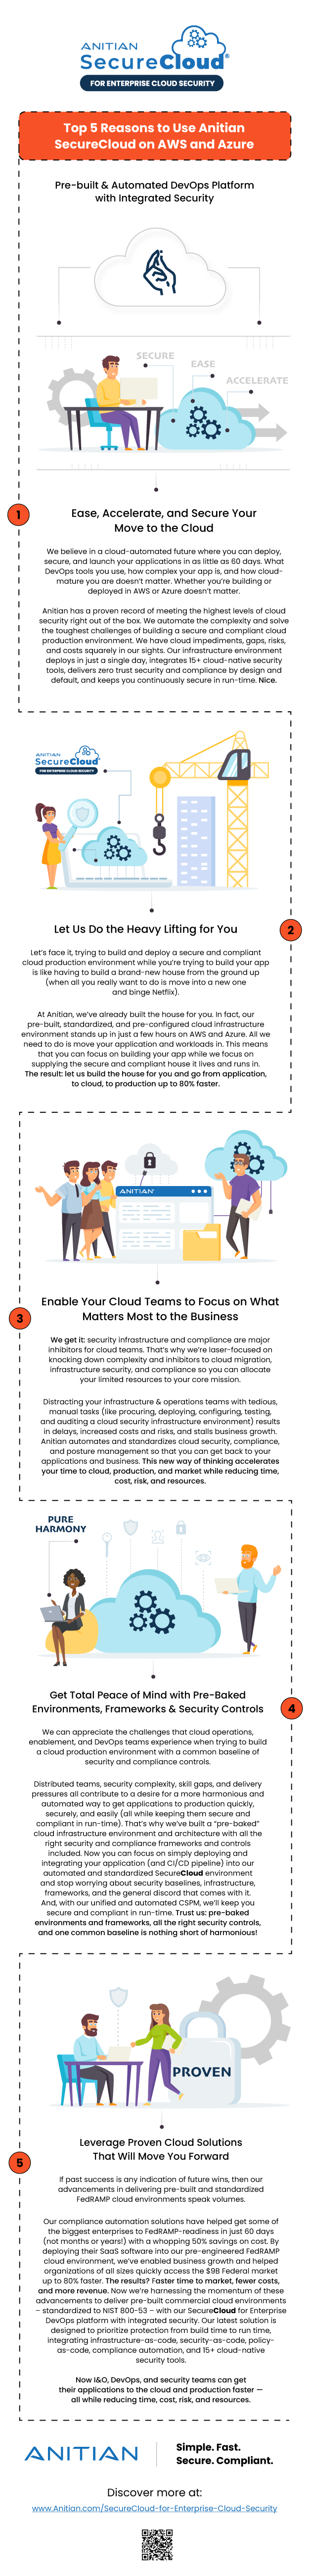 Infographic - Top 5 Reasons to Use Anitian SecureCloud on AWS and Azure - Anitian